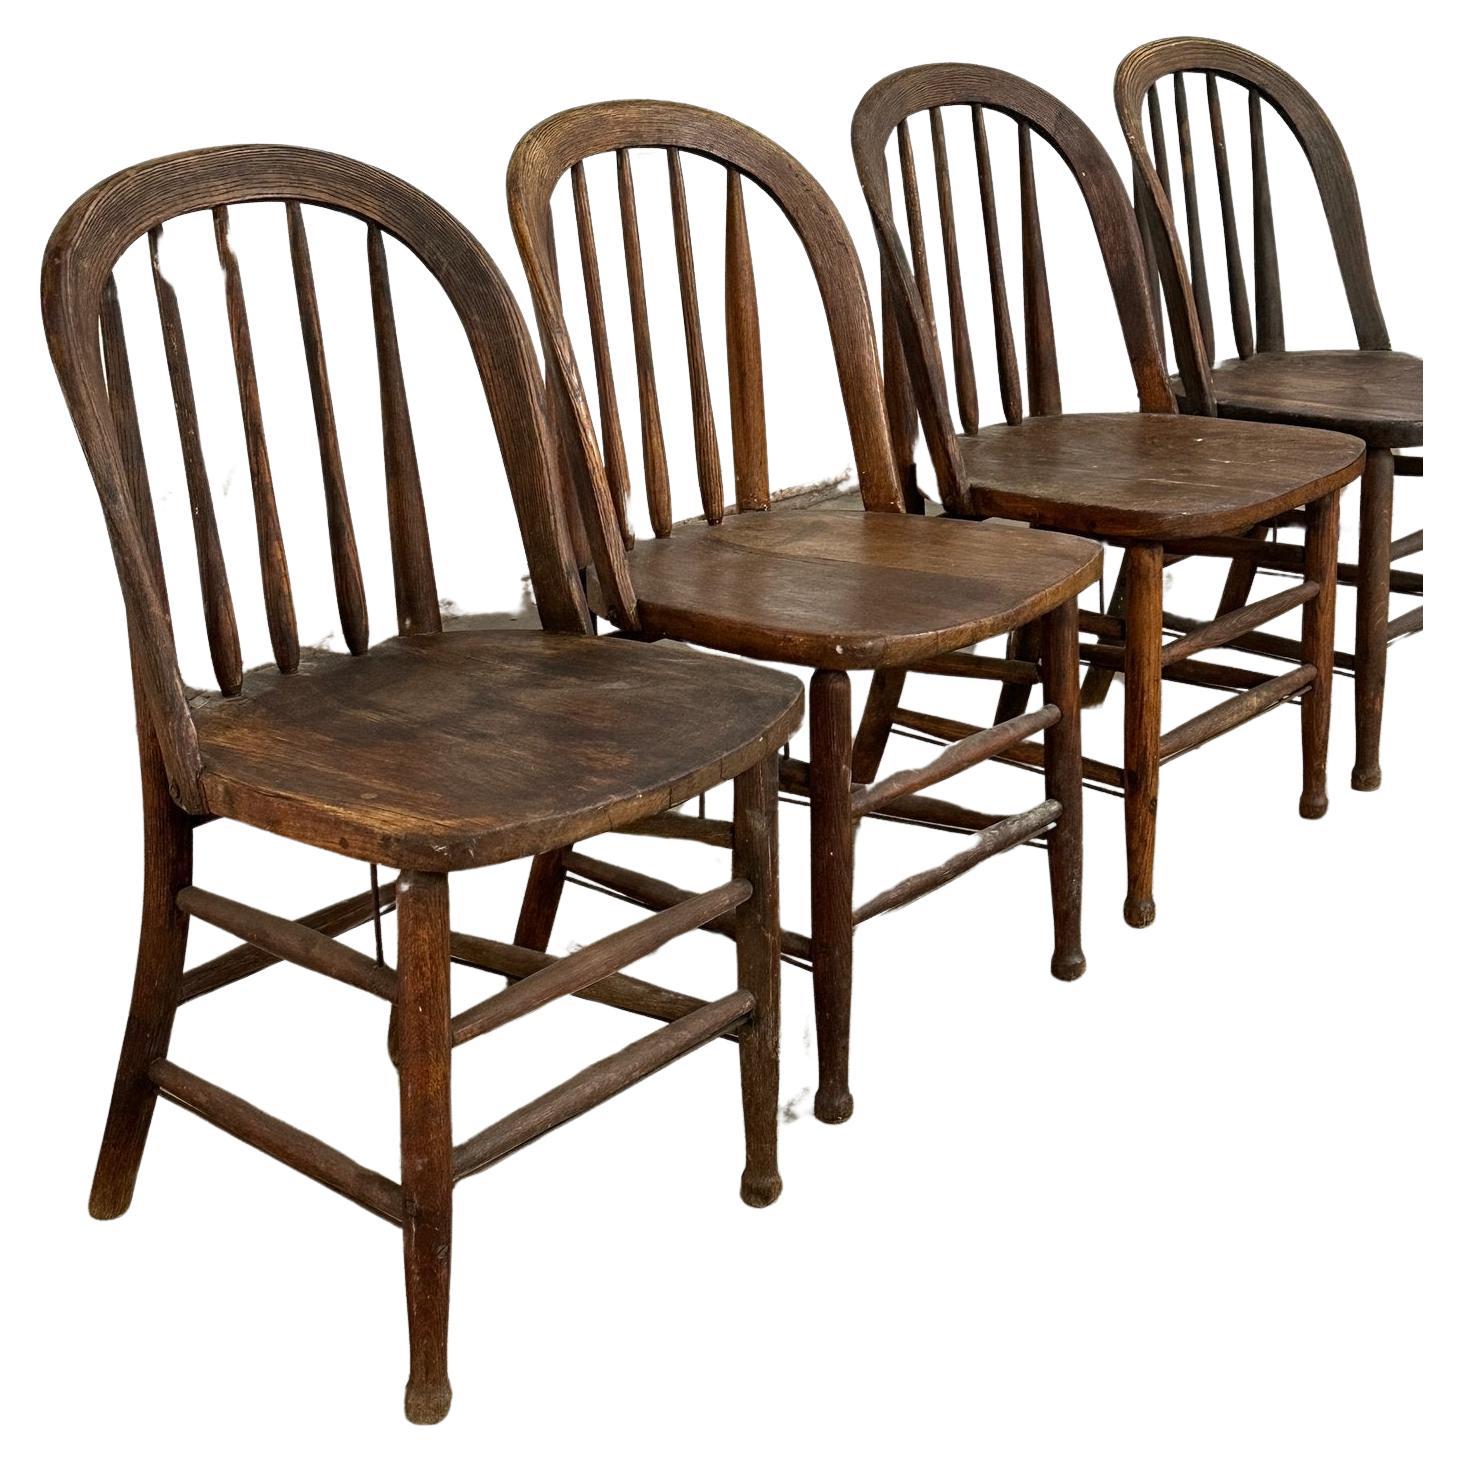 W17 D18 H34 SW17.5 SD16 SH17.5

Vintage Farmhouse Spindle Chairs in AS FOUND vintage condition. Chairs overall show well and feel strong and sturdy. These feature natural age and patina to finish from use. Price is for the set of 4